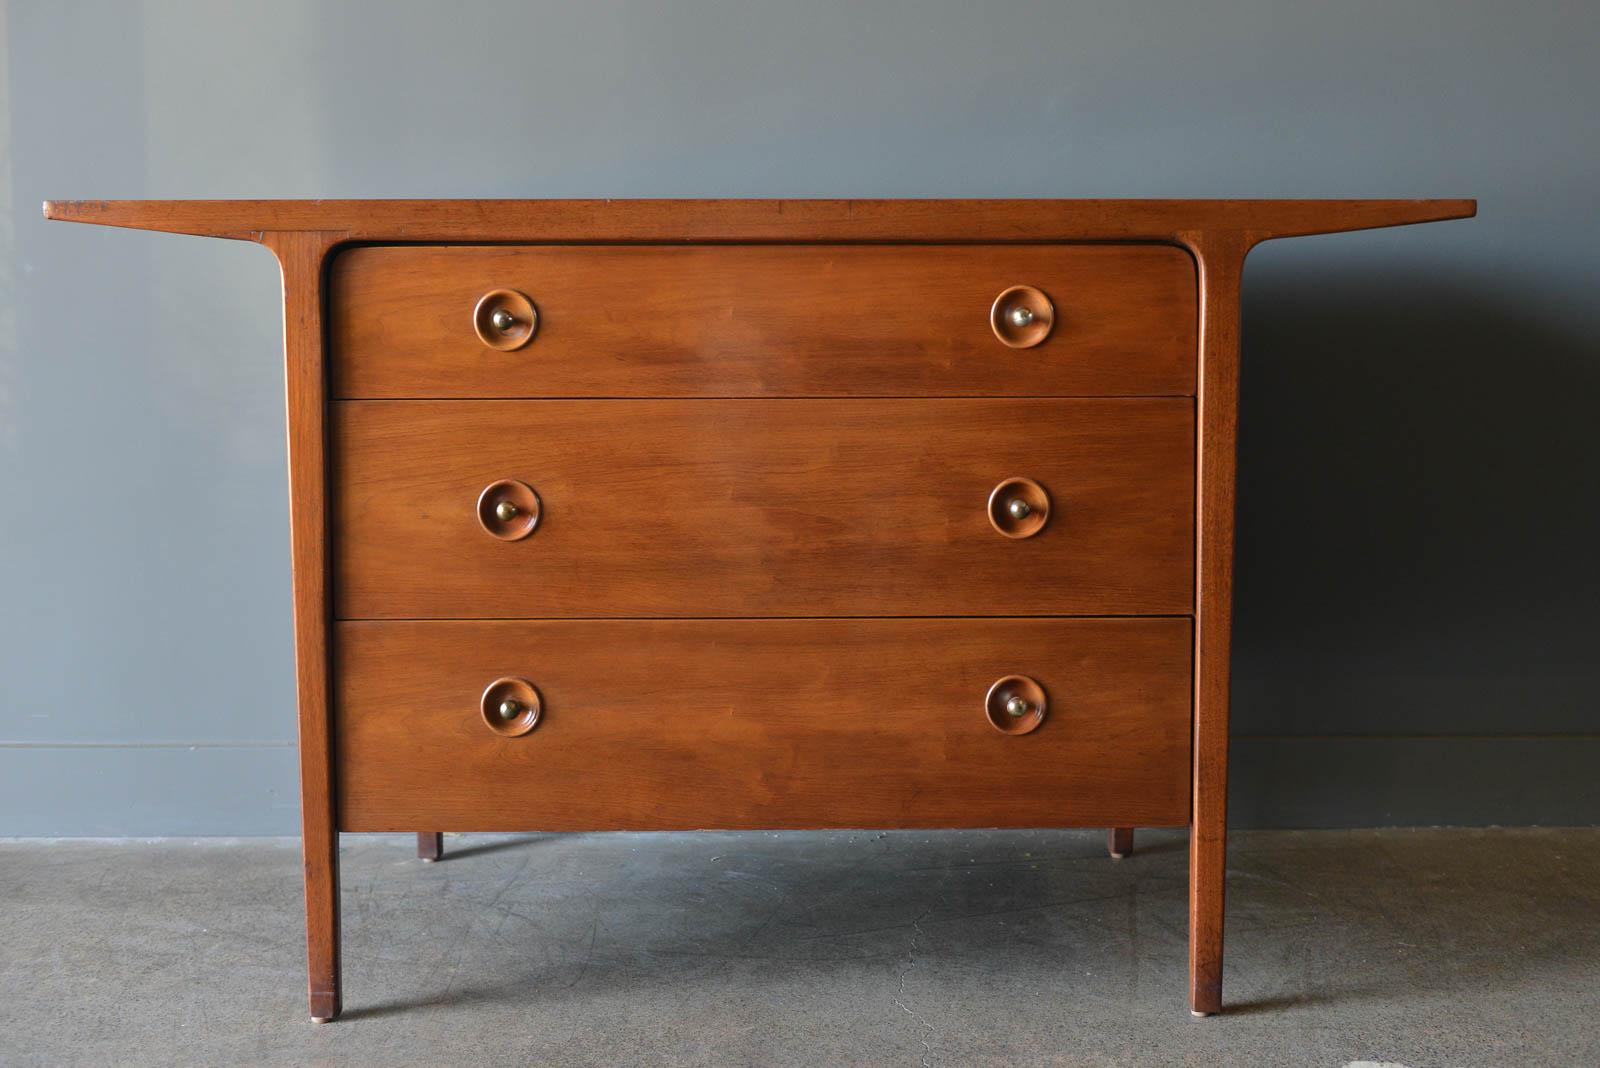 John Van Koert Span chest, circa 1960. Model 8007 for the counterpoint line for Drexel, this chest is made of mahogany and cherry with solid brass hardware. Very unique design, this chest is in good vintage condition with only slight wear and